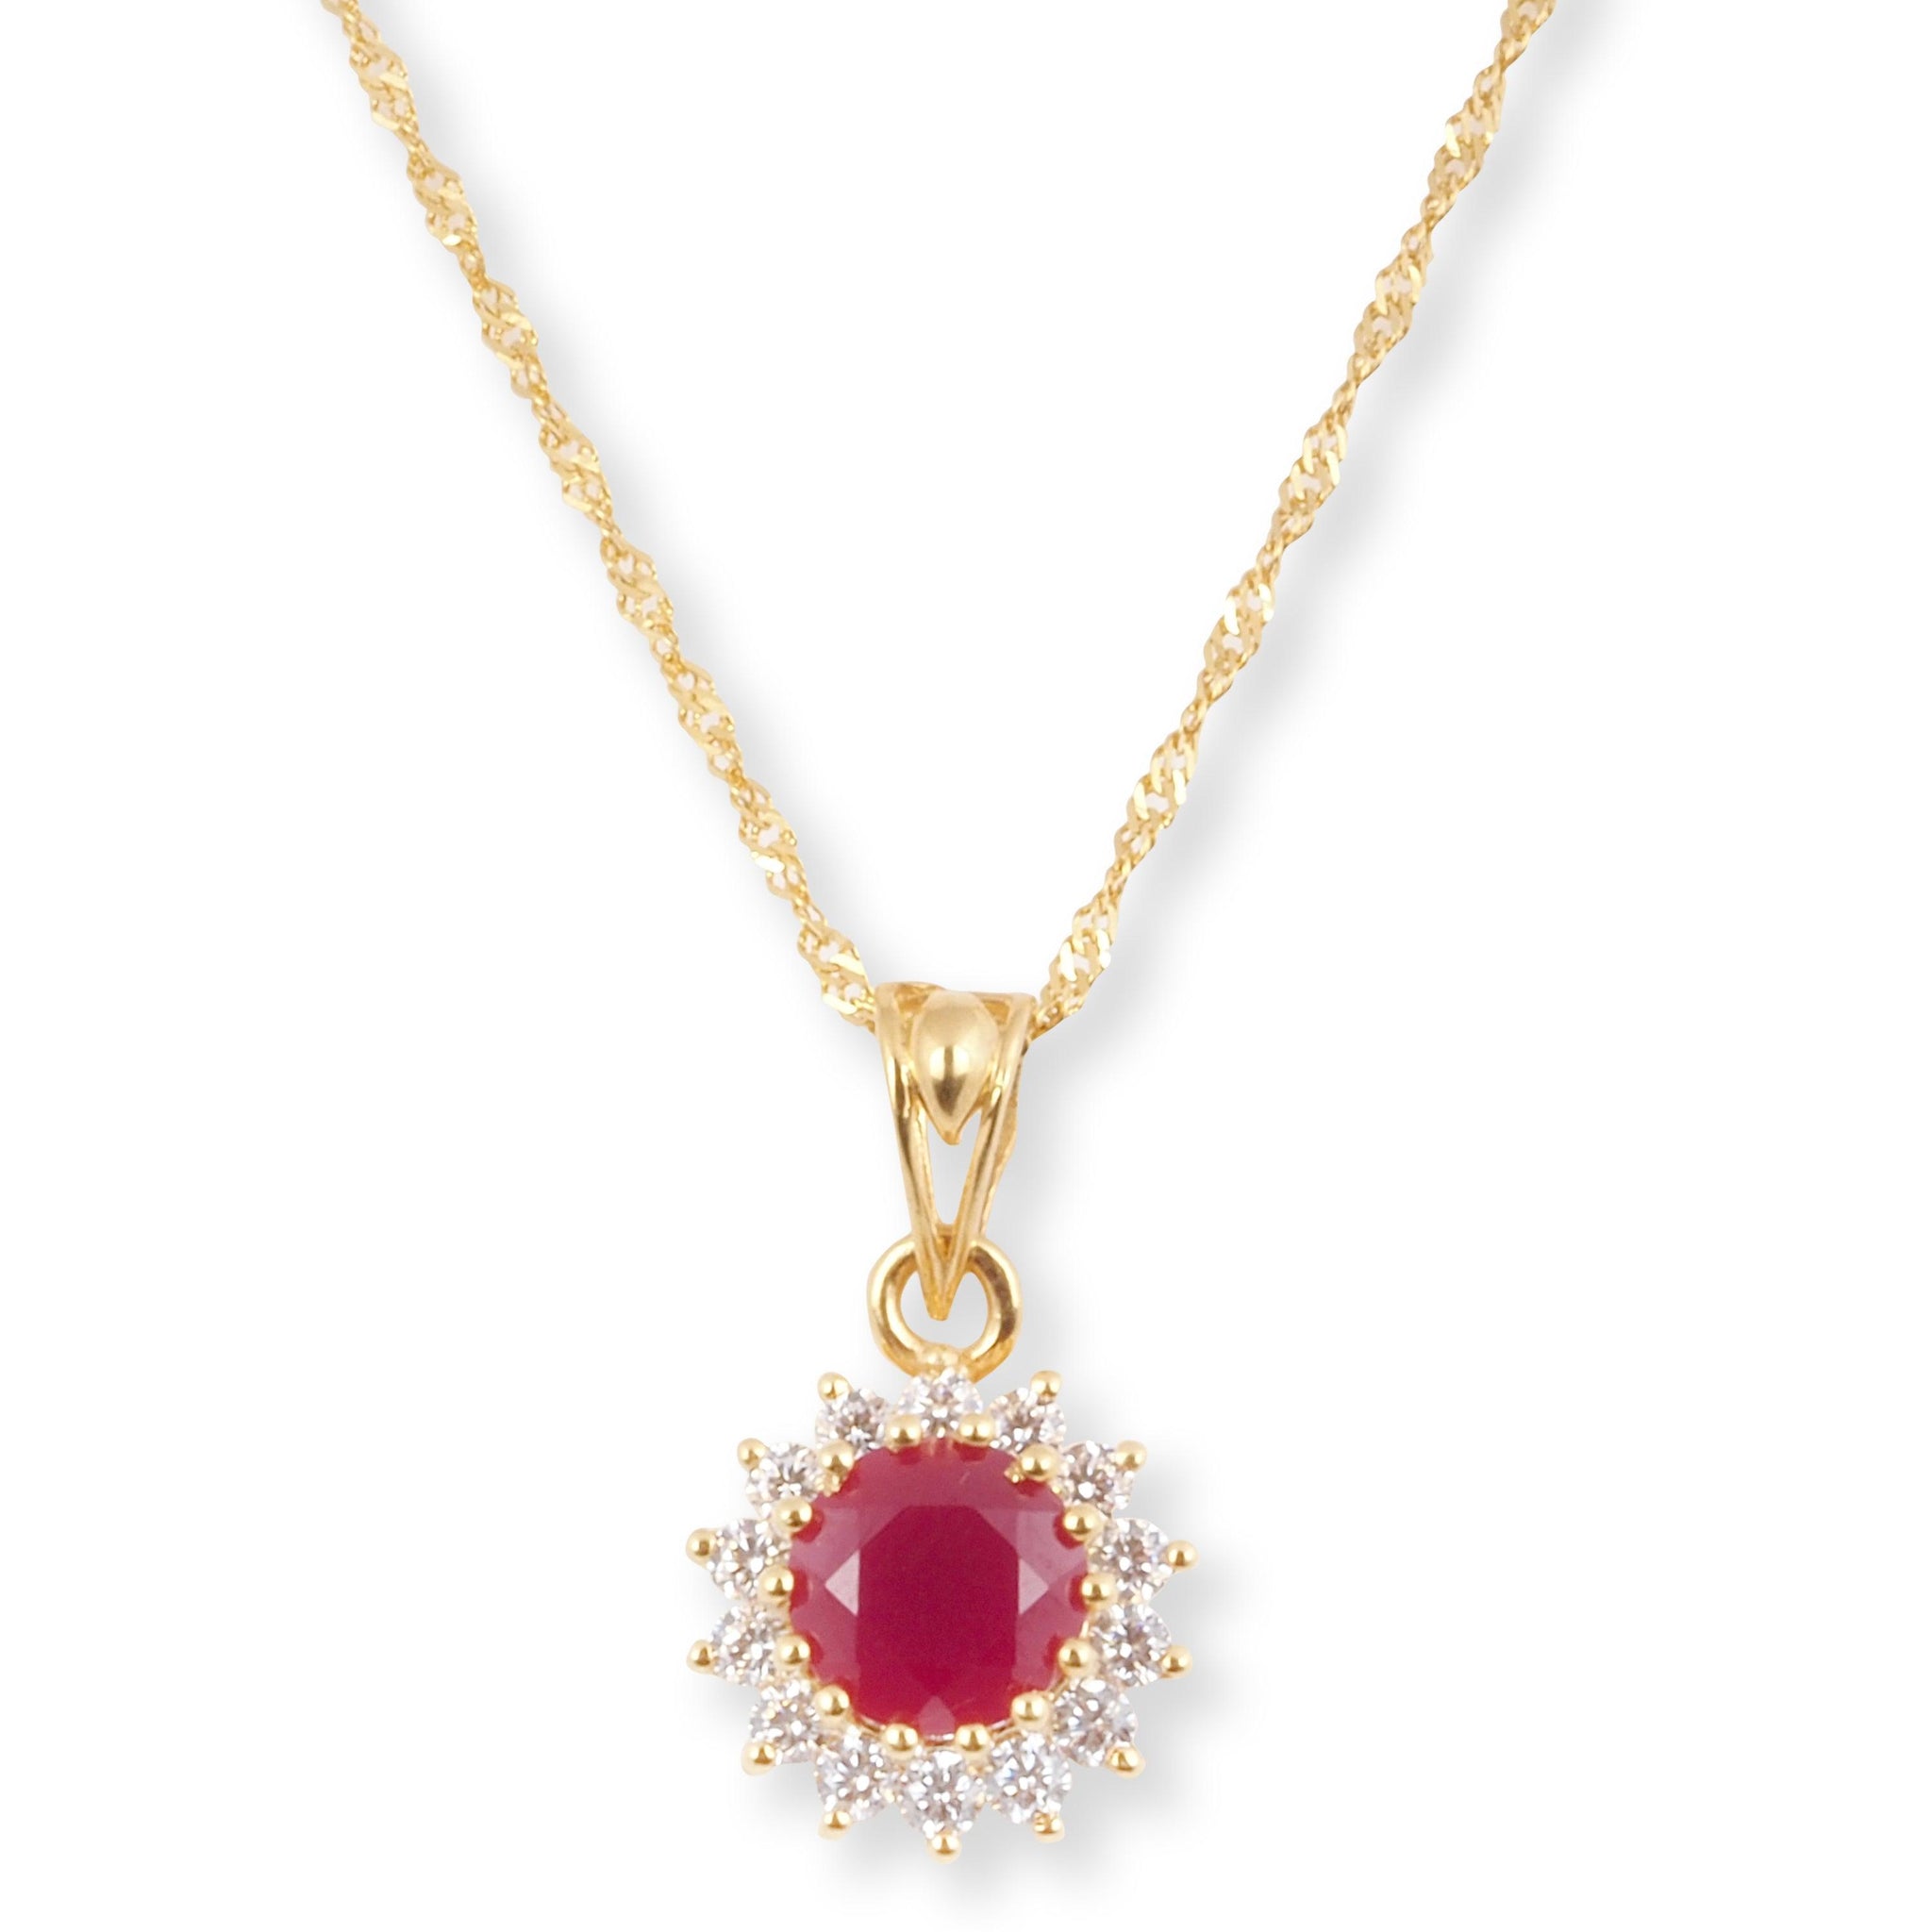 22ct Yellow Gold Pendant Set with Red Stone an Cubic Zirconia Stones.